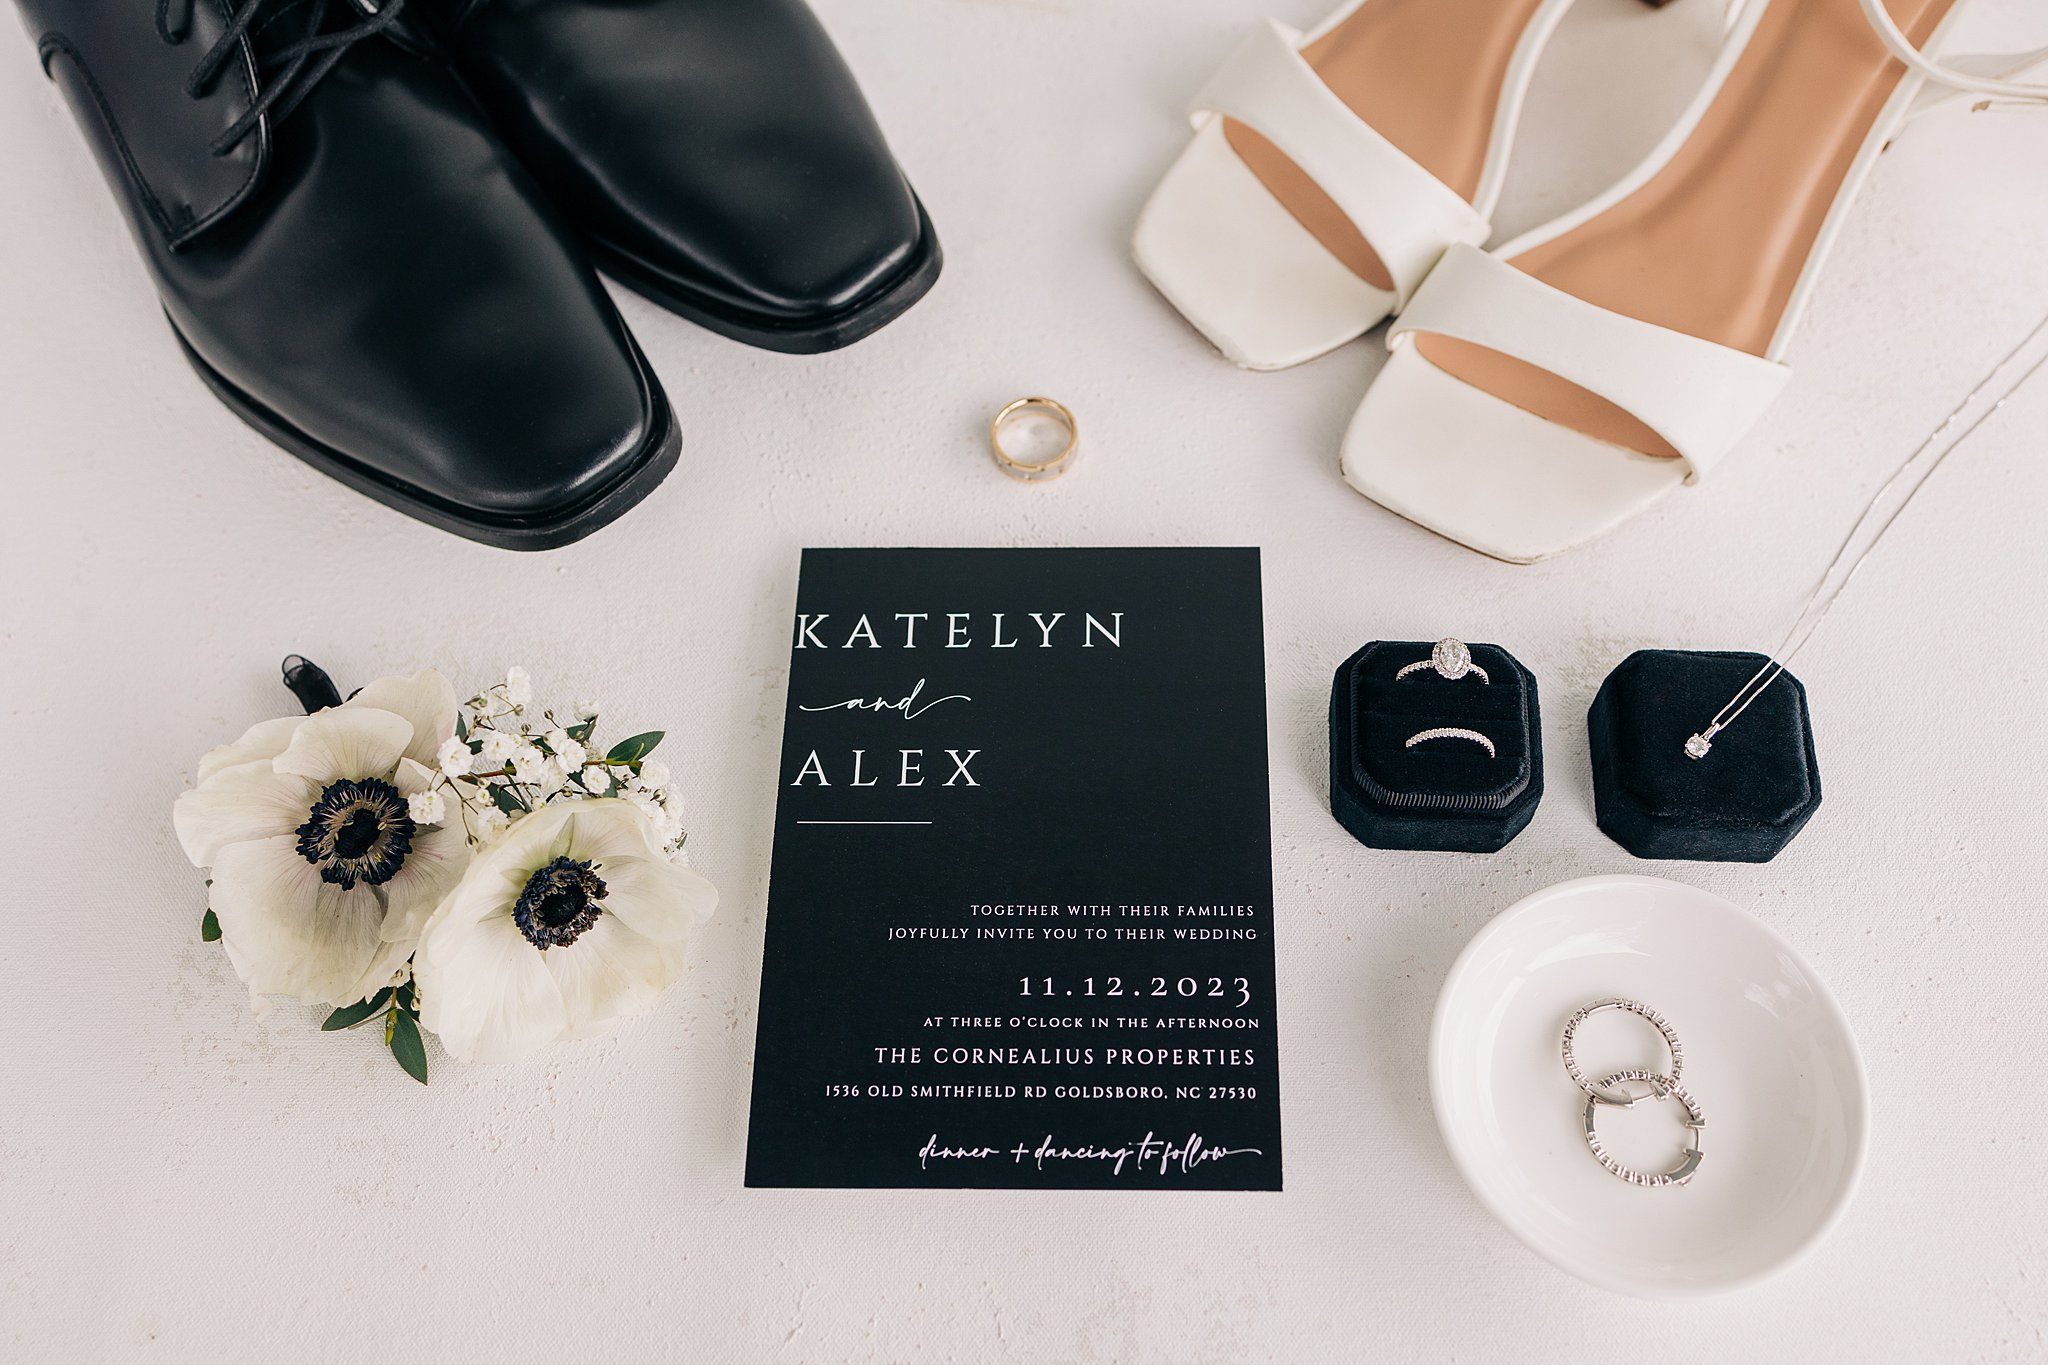 Details of a wedding with shoes, jewelry and an invitation